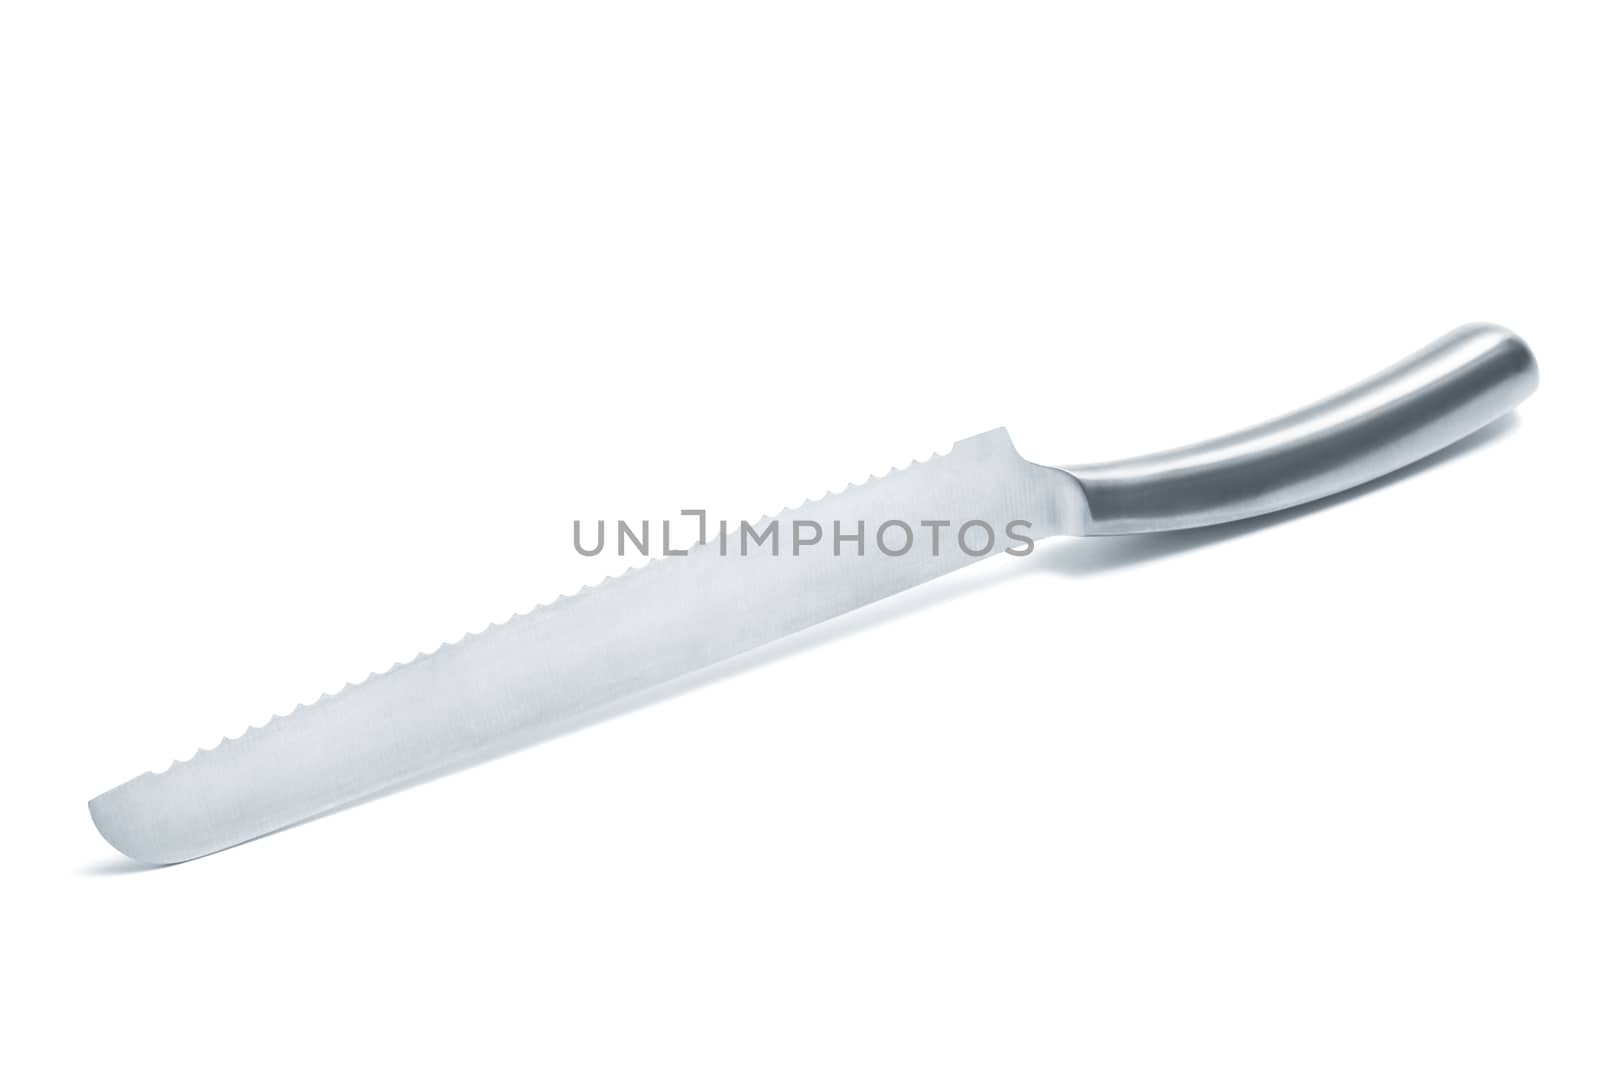 Modern bread knife on a white background